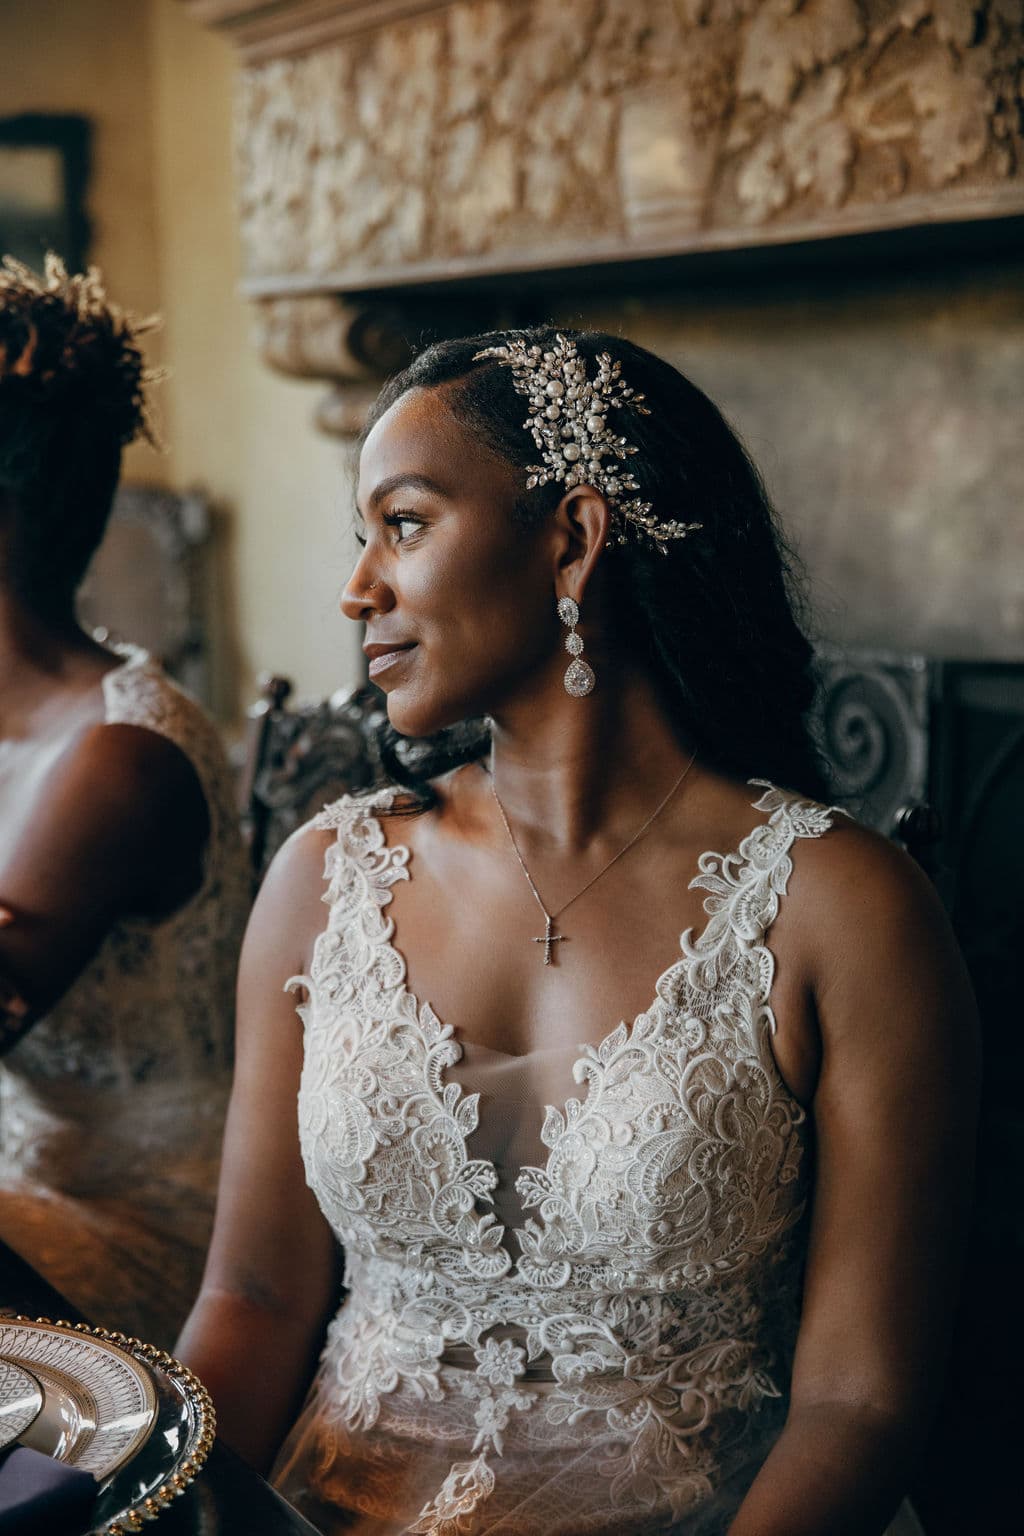 howey mansion black bride in wedding dress from photoshoot with Wedding Vendors that Celebrate Diversity